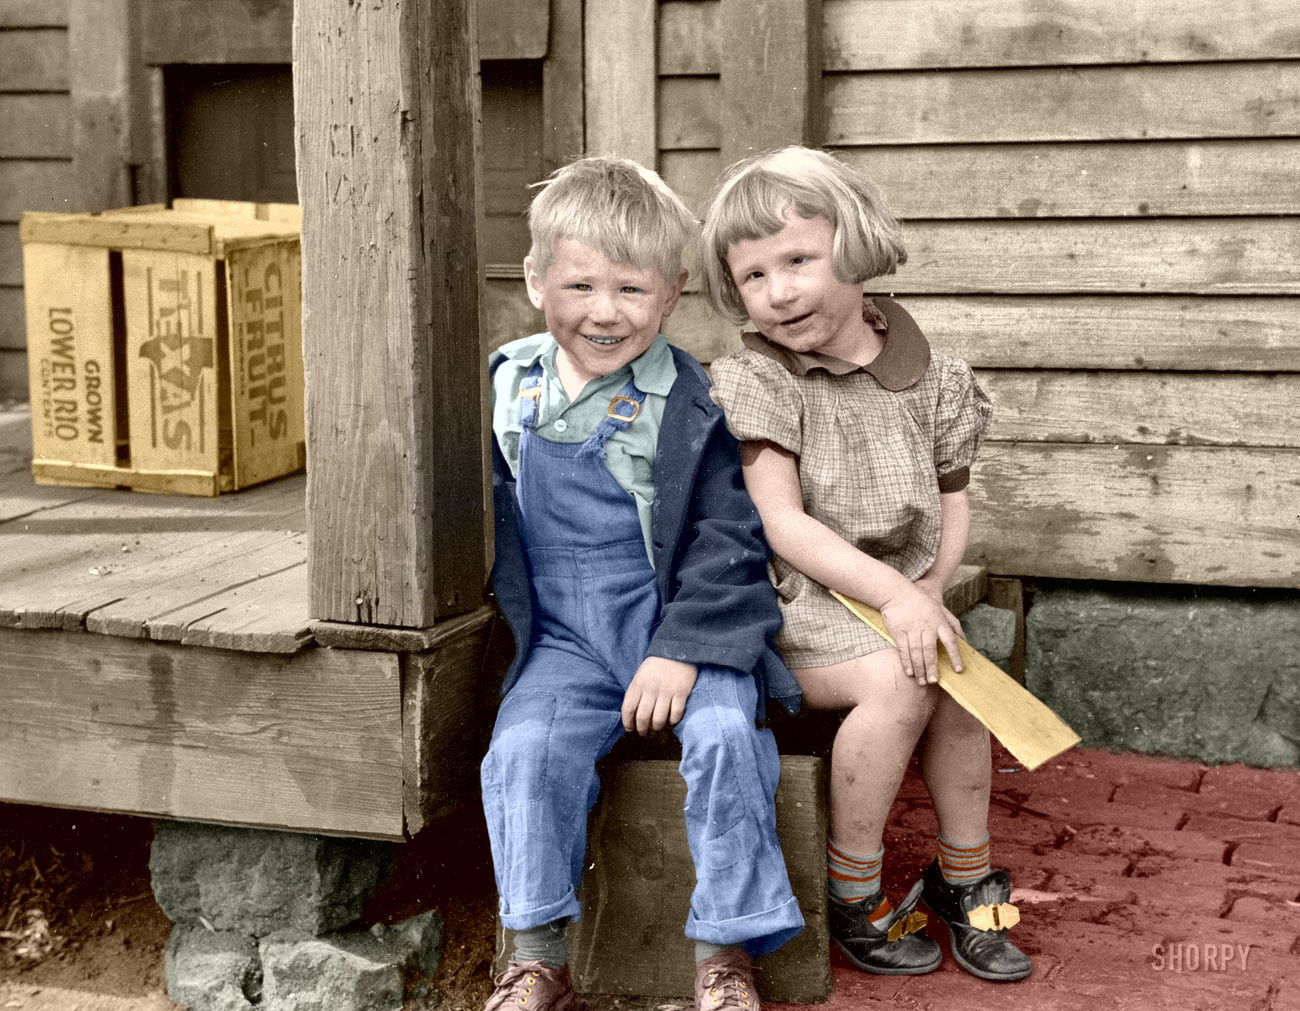 Slum Kids-II (Colorized) from Shorpy's files.
April 1940. Dubuque, Iowa. "Children who live in the slums." Our second look at this towheaded twosome, a sort of proto-Opie and his sister. 35mm nitrate negative by John Vachon for the Farm Security Administration. View full size